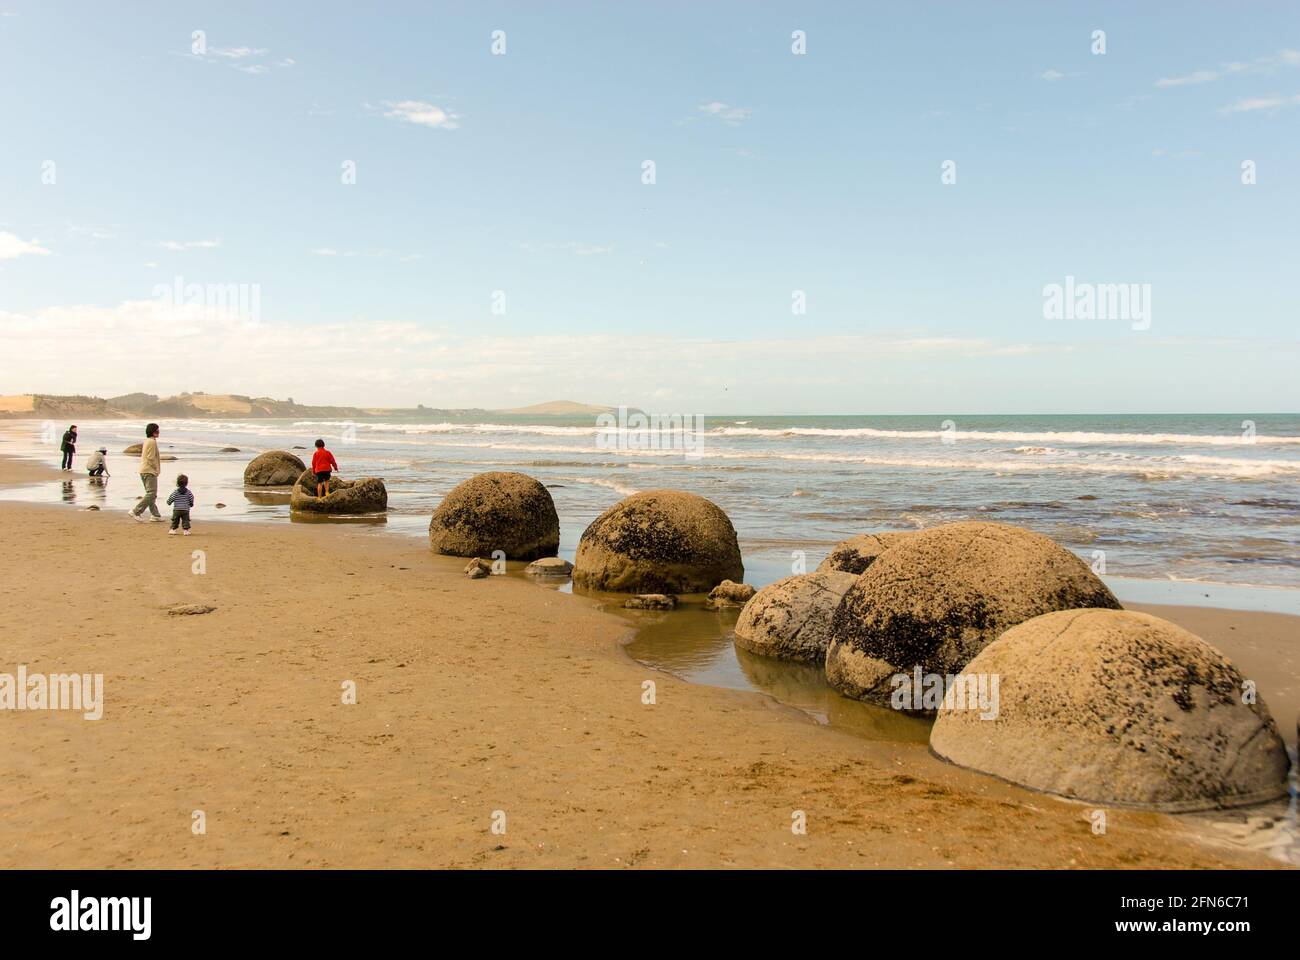 Lost marbles of a giant? The Moeraki Boulders at Koekohe Beach on New Zealand's South Island are a popular attraction for locals and tourists. Stock Photo